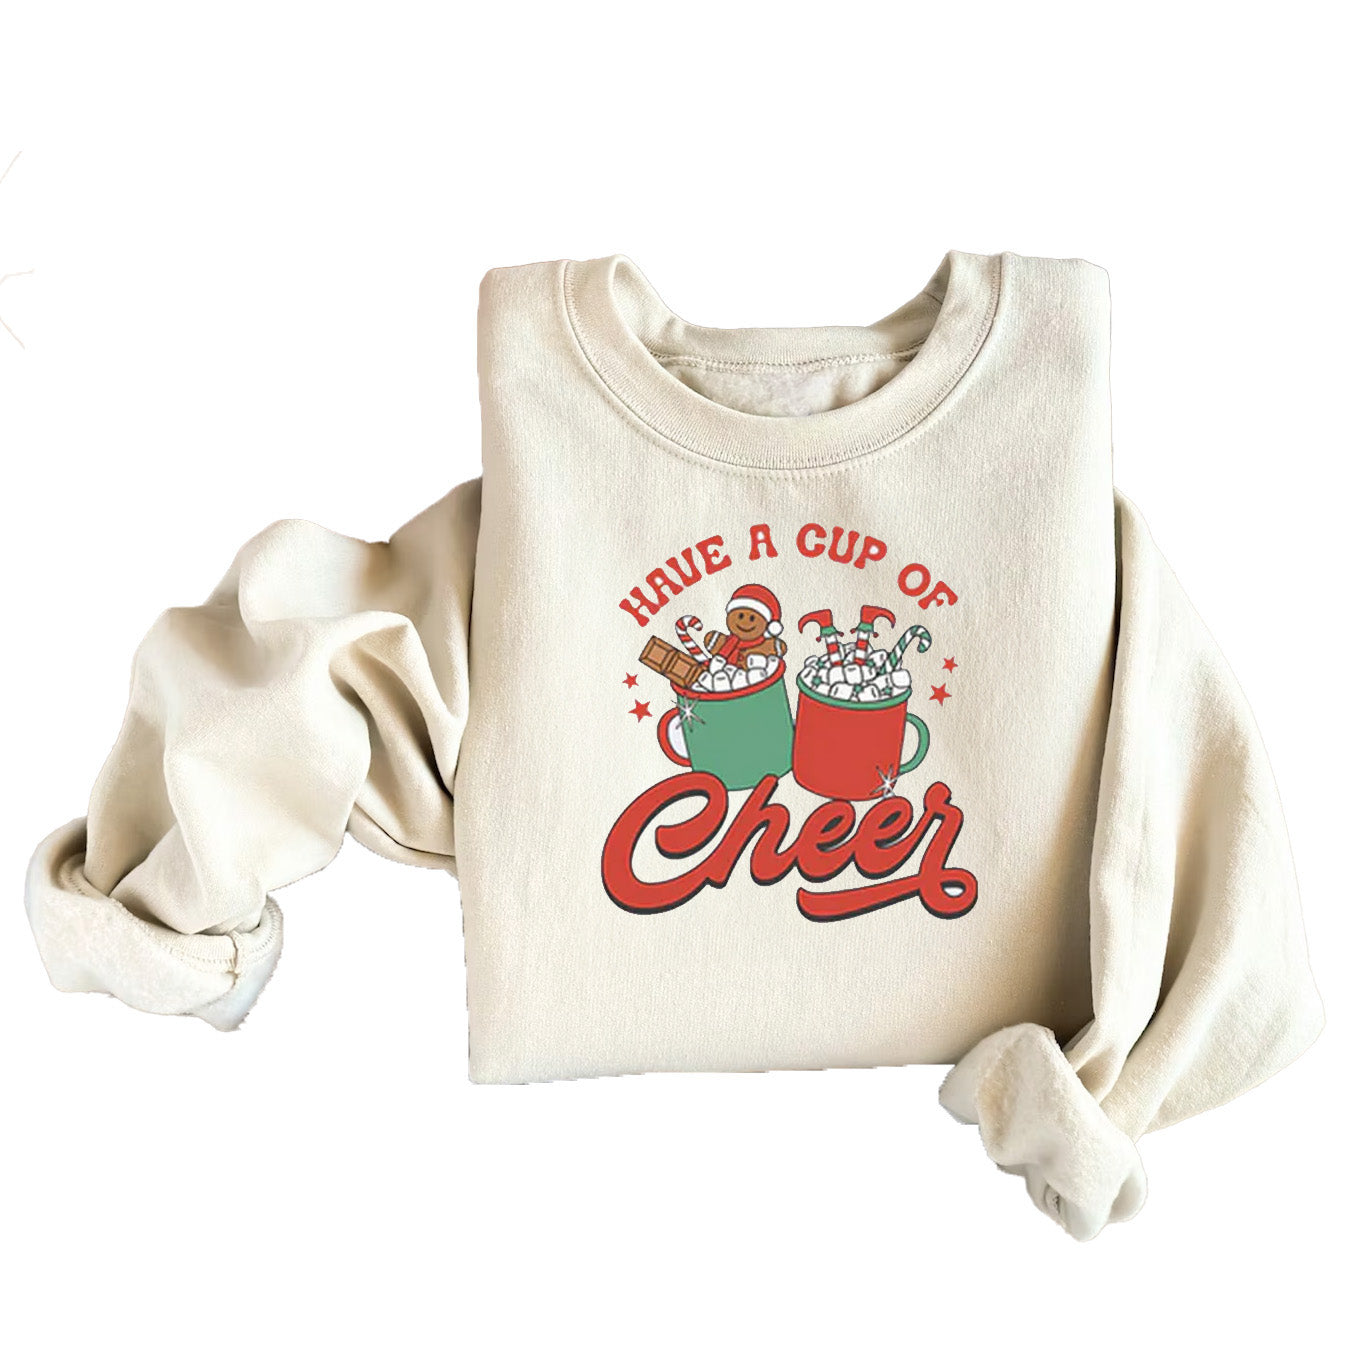 Have a Cup of Cheer Kids Unisex off-white Holiday Sweatshirt for Girls, Boys, and Teens